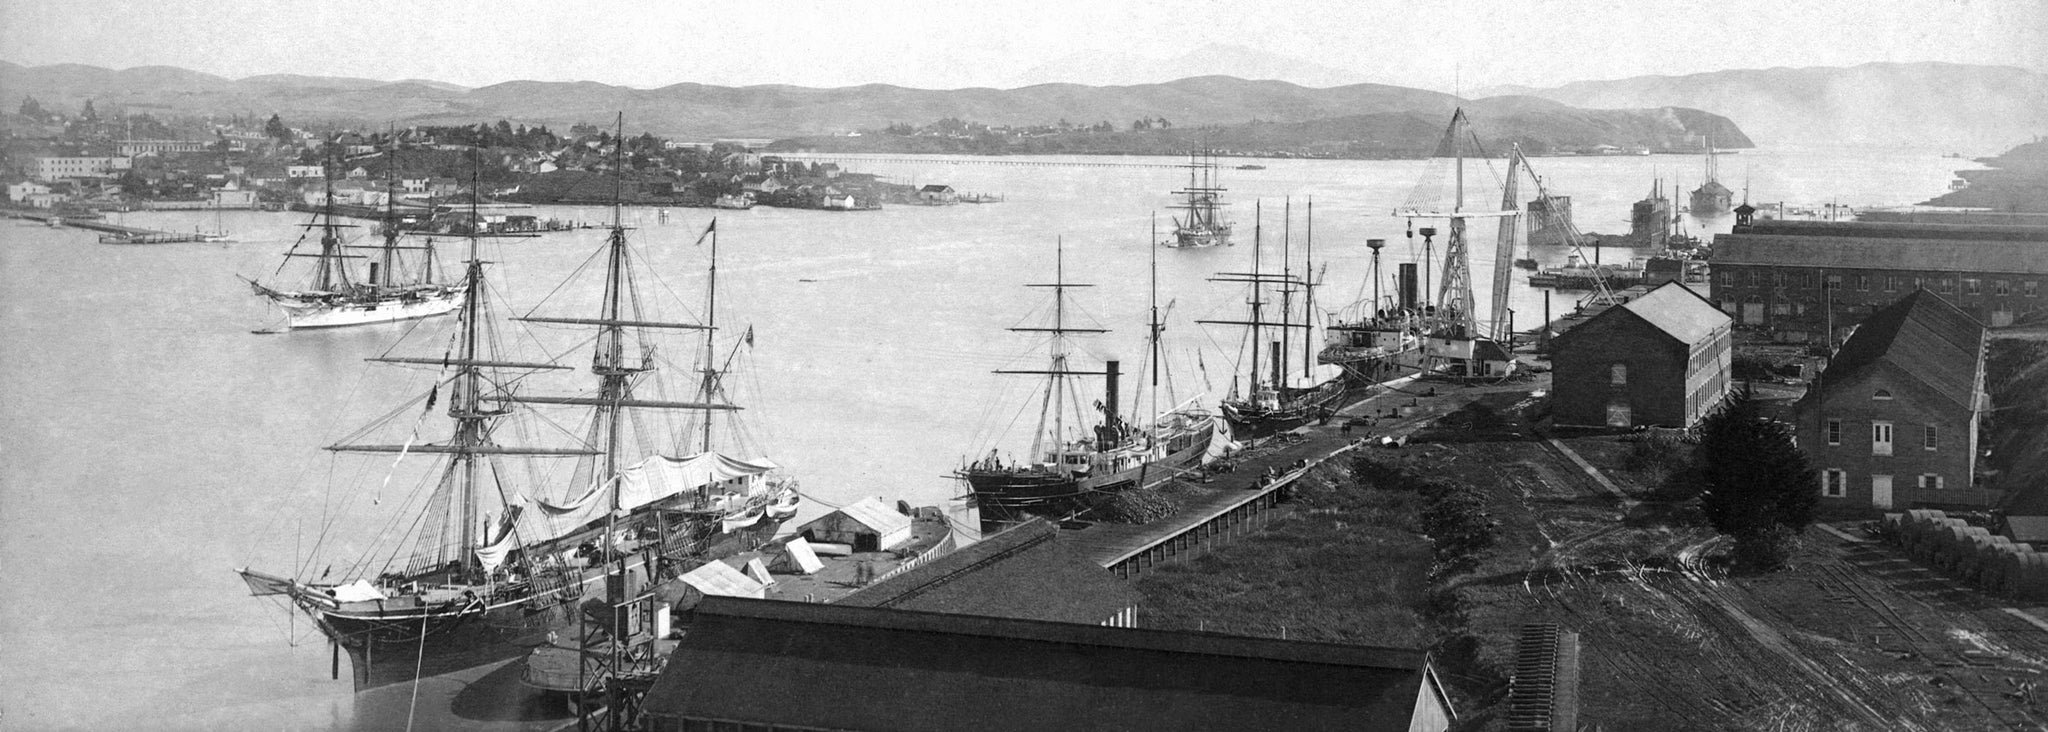 Mare Island waterfront looking south, 1890s. The USS Independence is pictured. Vallejo is visible across the Mare Island Straits. -- Courtesy Vallejo Naval and Historical Museum